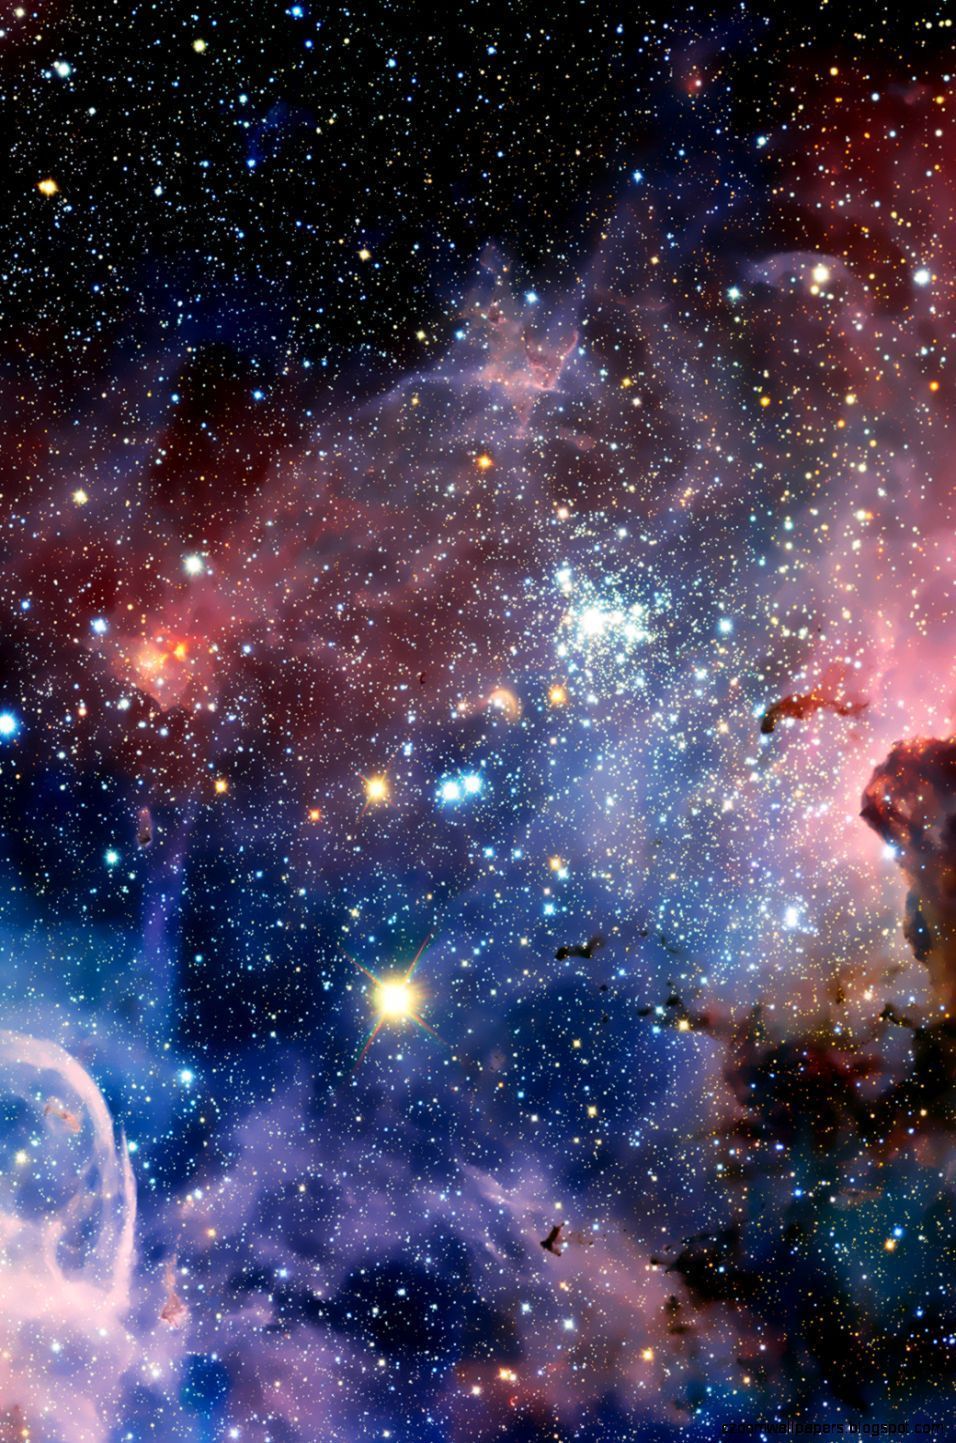 Iphone 5 Space Wallpaper Zoom Backgrounds